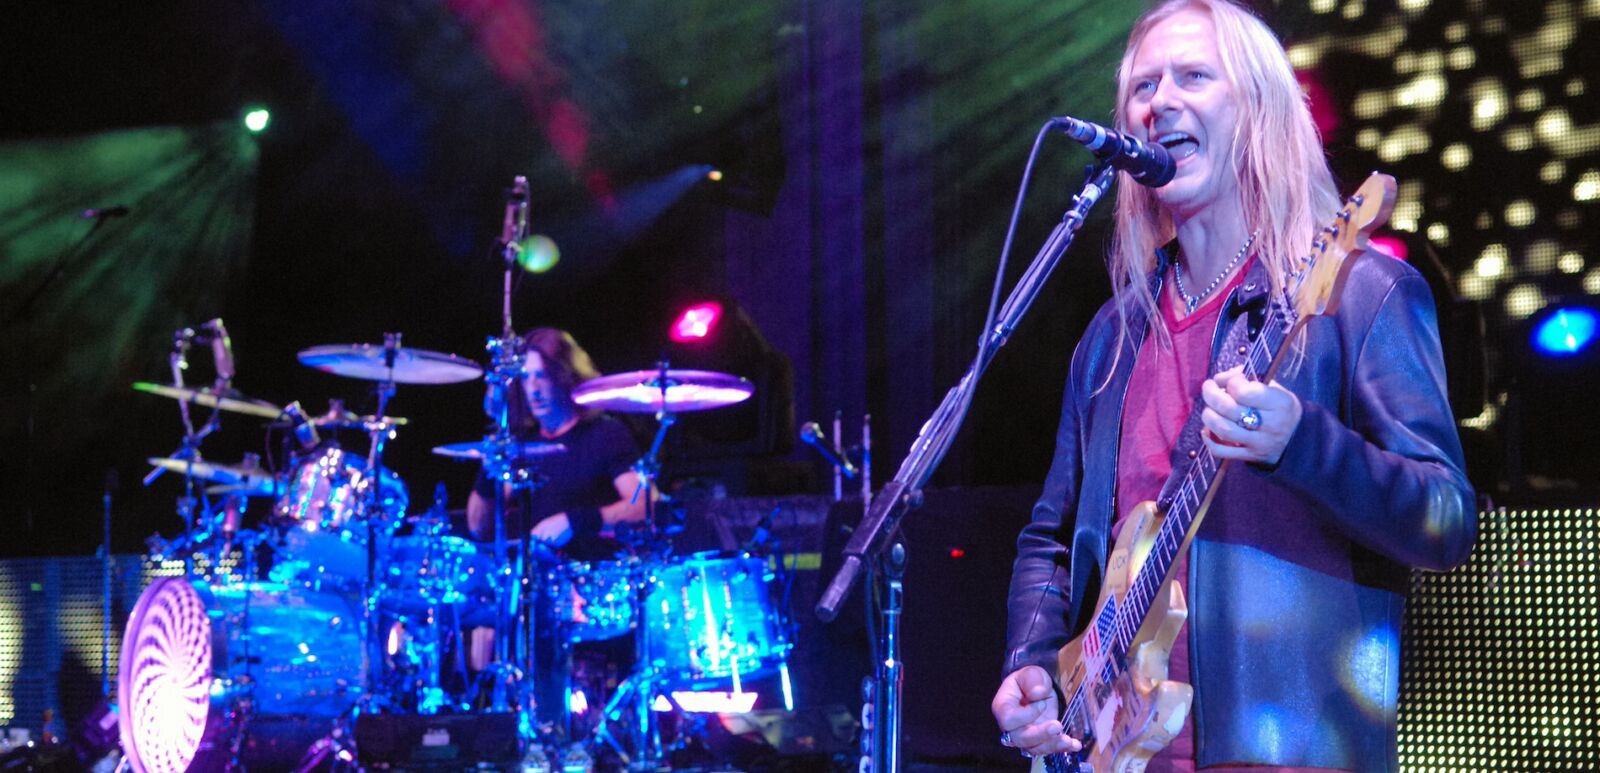 Guitarist/Vocalist Jerry Cantrell of the Heavy Metal band Alice in Chains performs in concert October 4, 2010 at Red Rocks Amphitheater in Denver, CO.